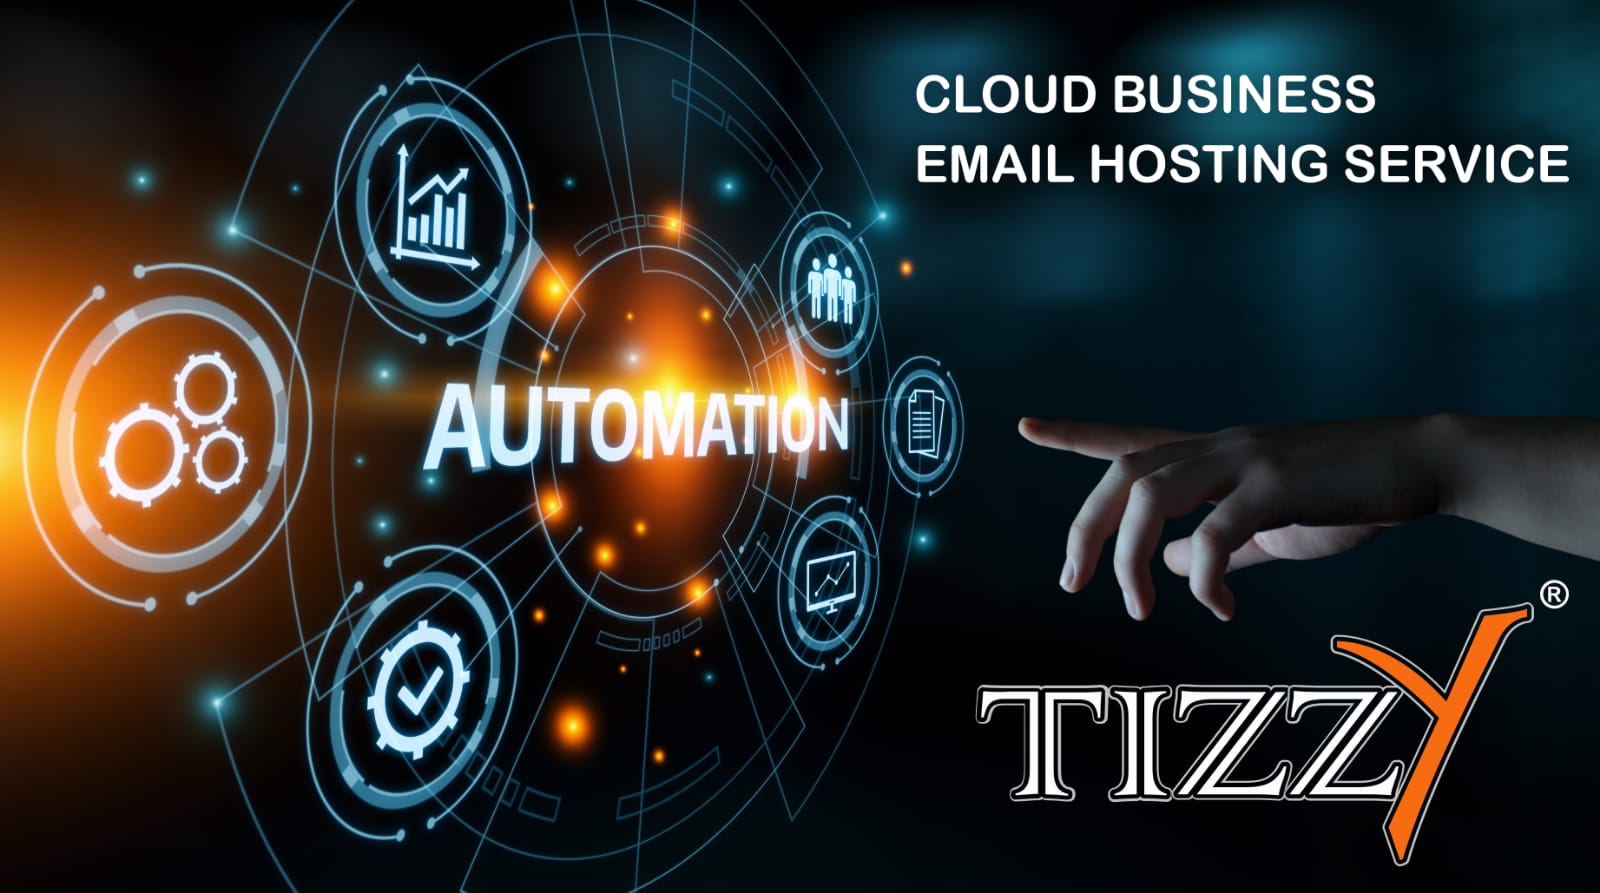 Tizzy Cloud Computing Private Limited,Tizzy Cloud,Cloud Business,Email Hosting,Email Hosting Industry, Tizzy Mail,Email Hosting Service Provider